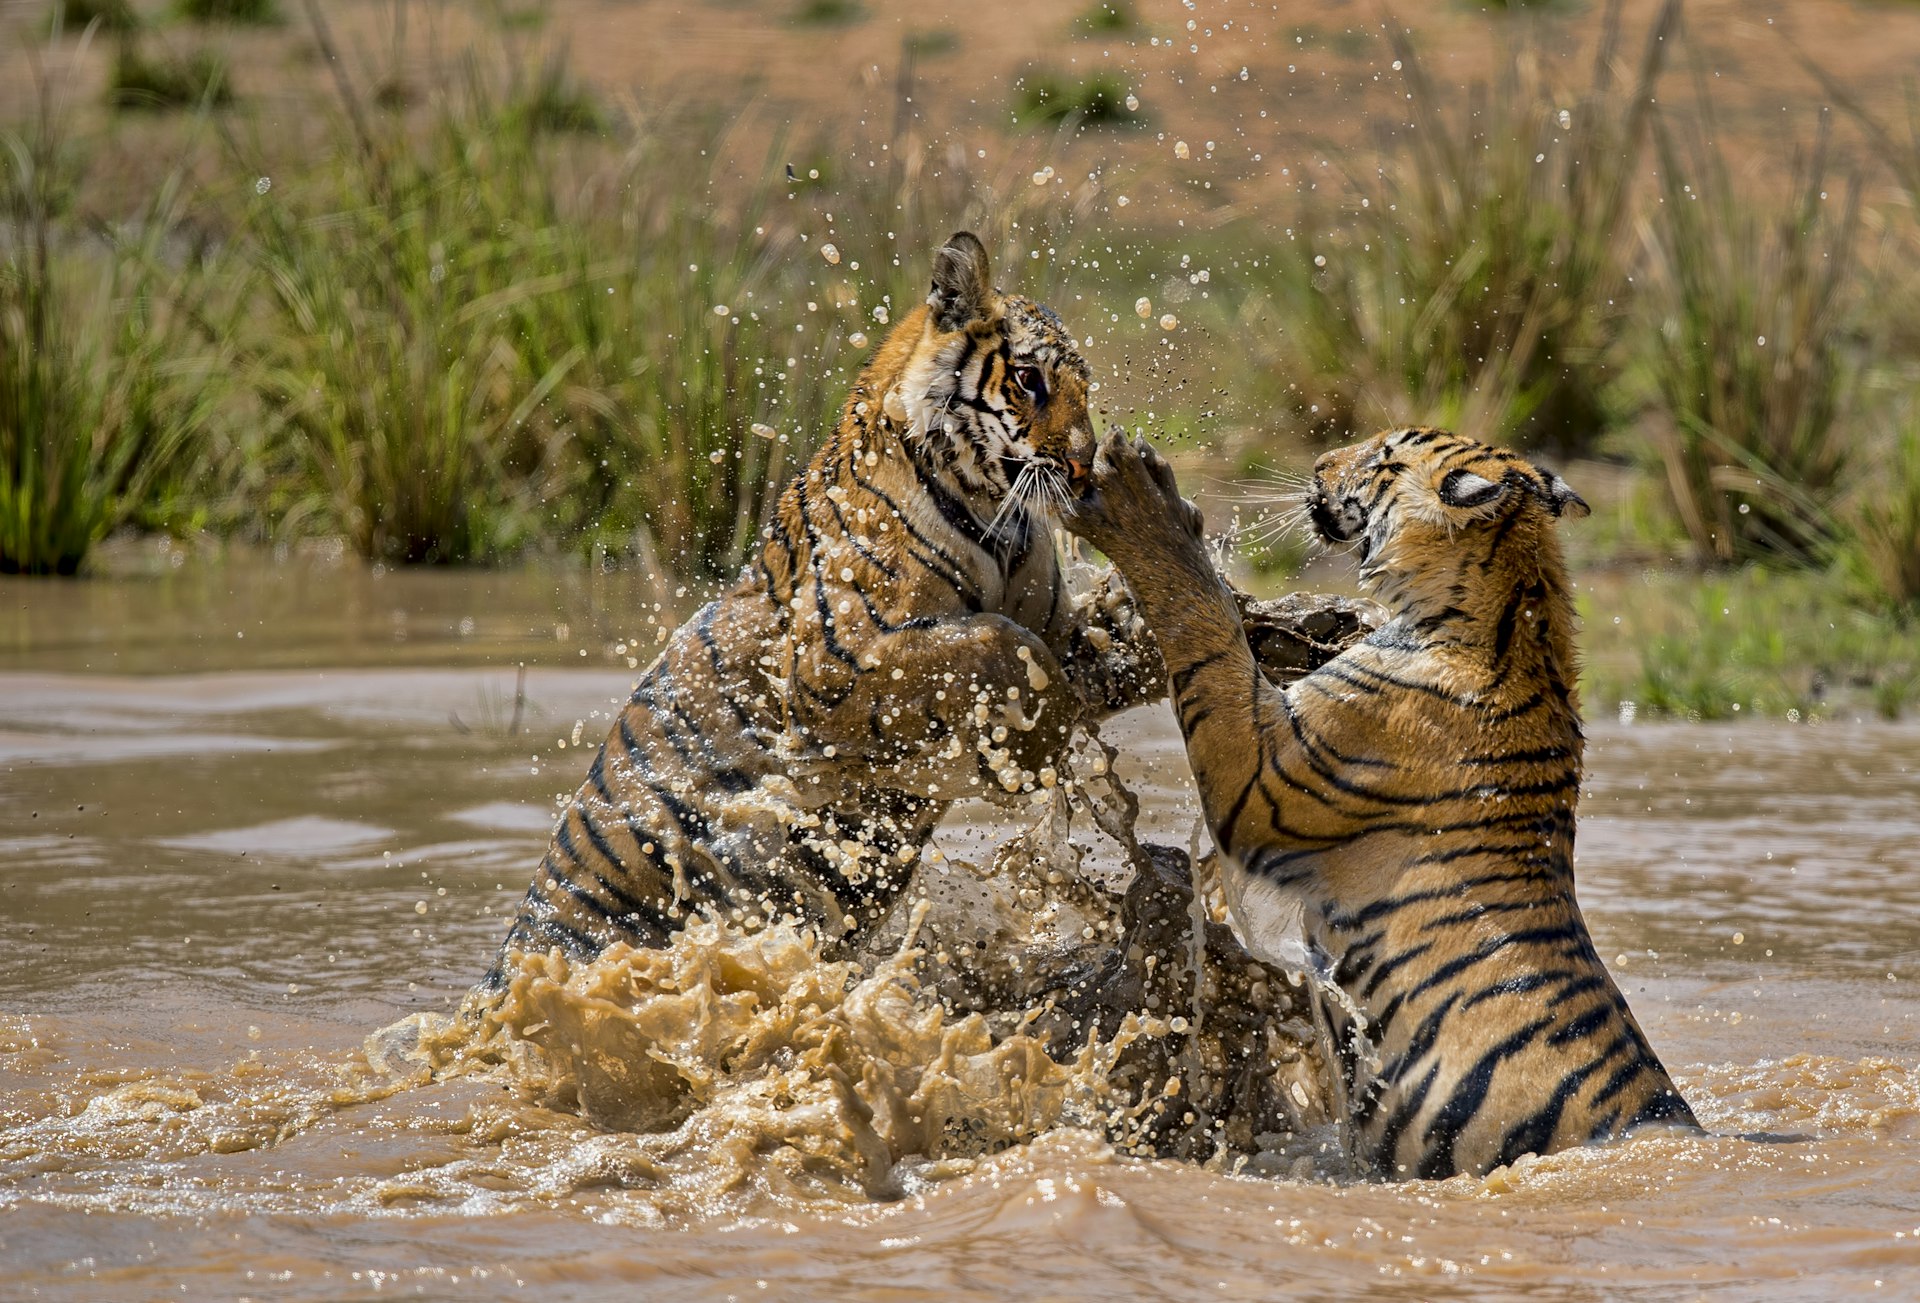 Even with expert help, tigers are hard to spot – but there are few better places to try than India's Bandhavgarh and Kanha national parks © Abhishek Singh & illuminati visuals / Getty Images